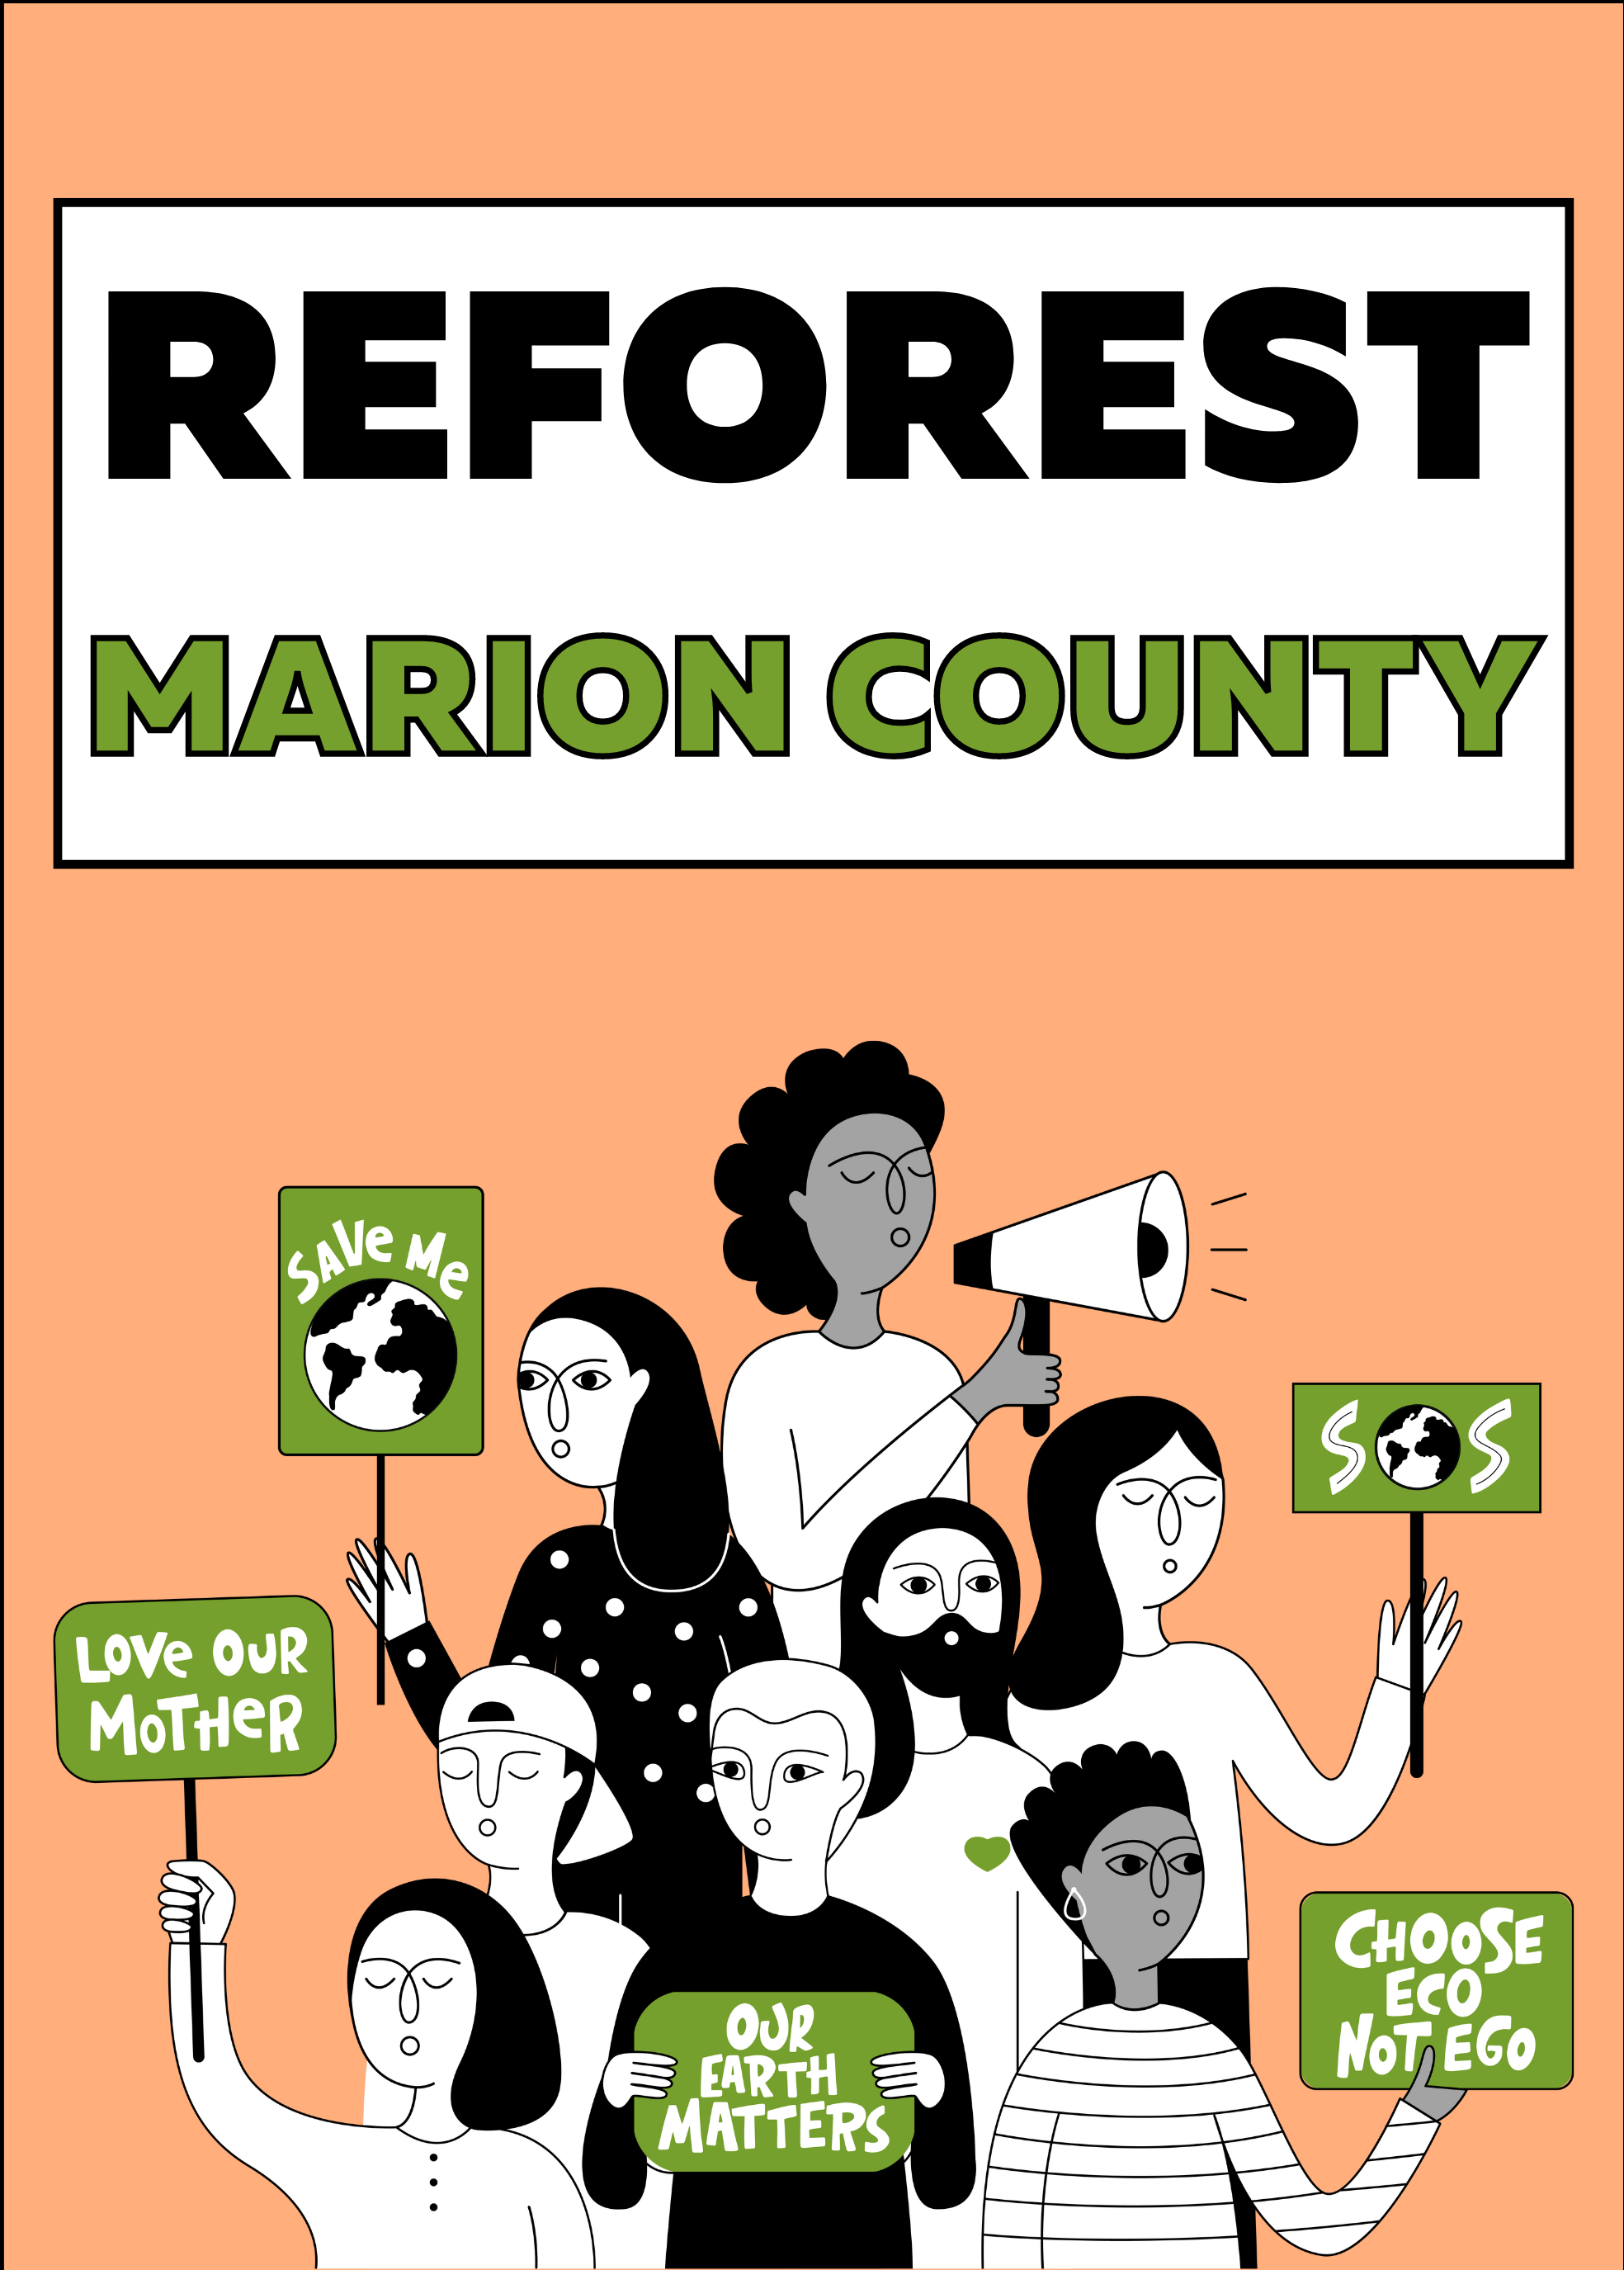 Text reads Reforest Marion County. Below, there are drawn images of people of various genders and ethnic origins holding signs that say Love our mother, our earth matters, choose eco not eco, save me above an image of the earth, and S.O.S. with earth in place of the O.